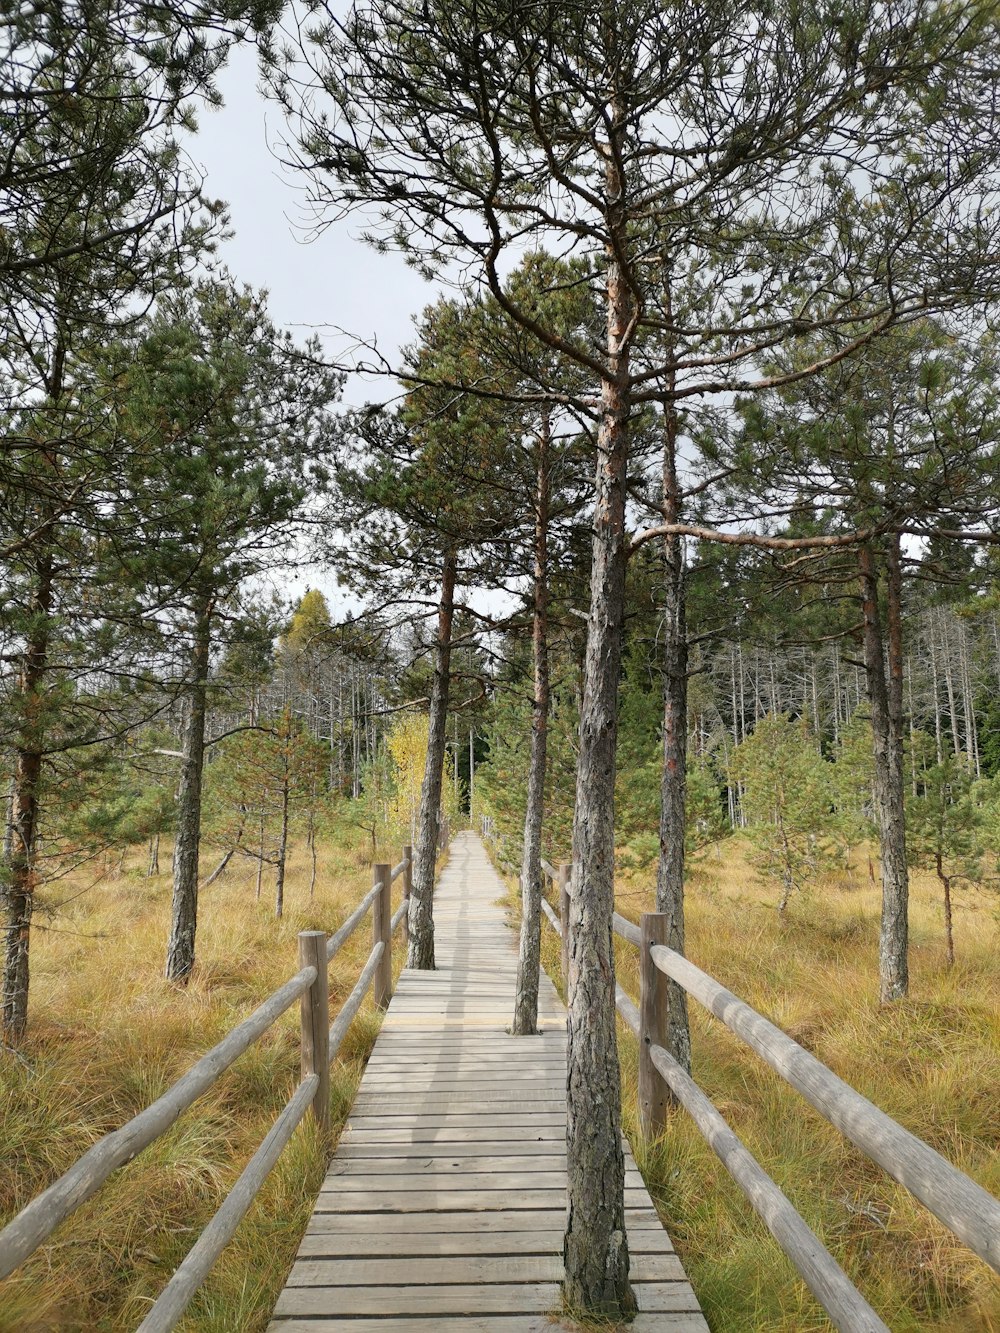 a wooden walkway through a forest with tall trees